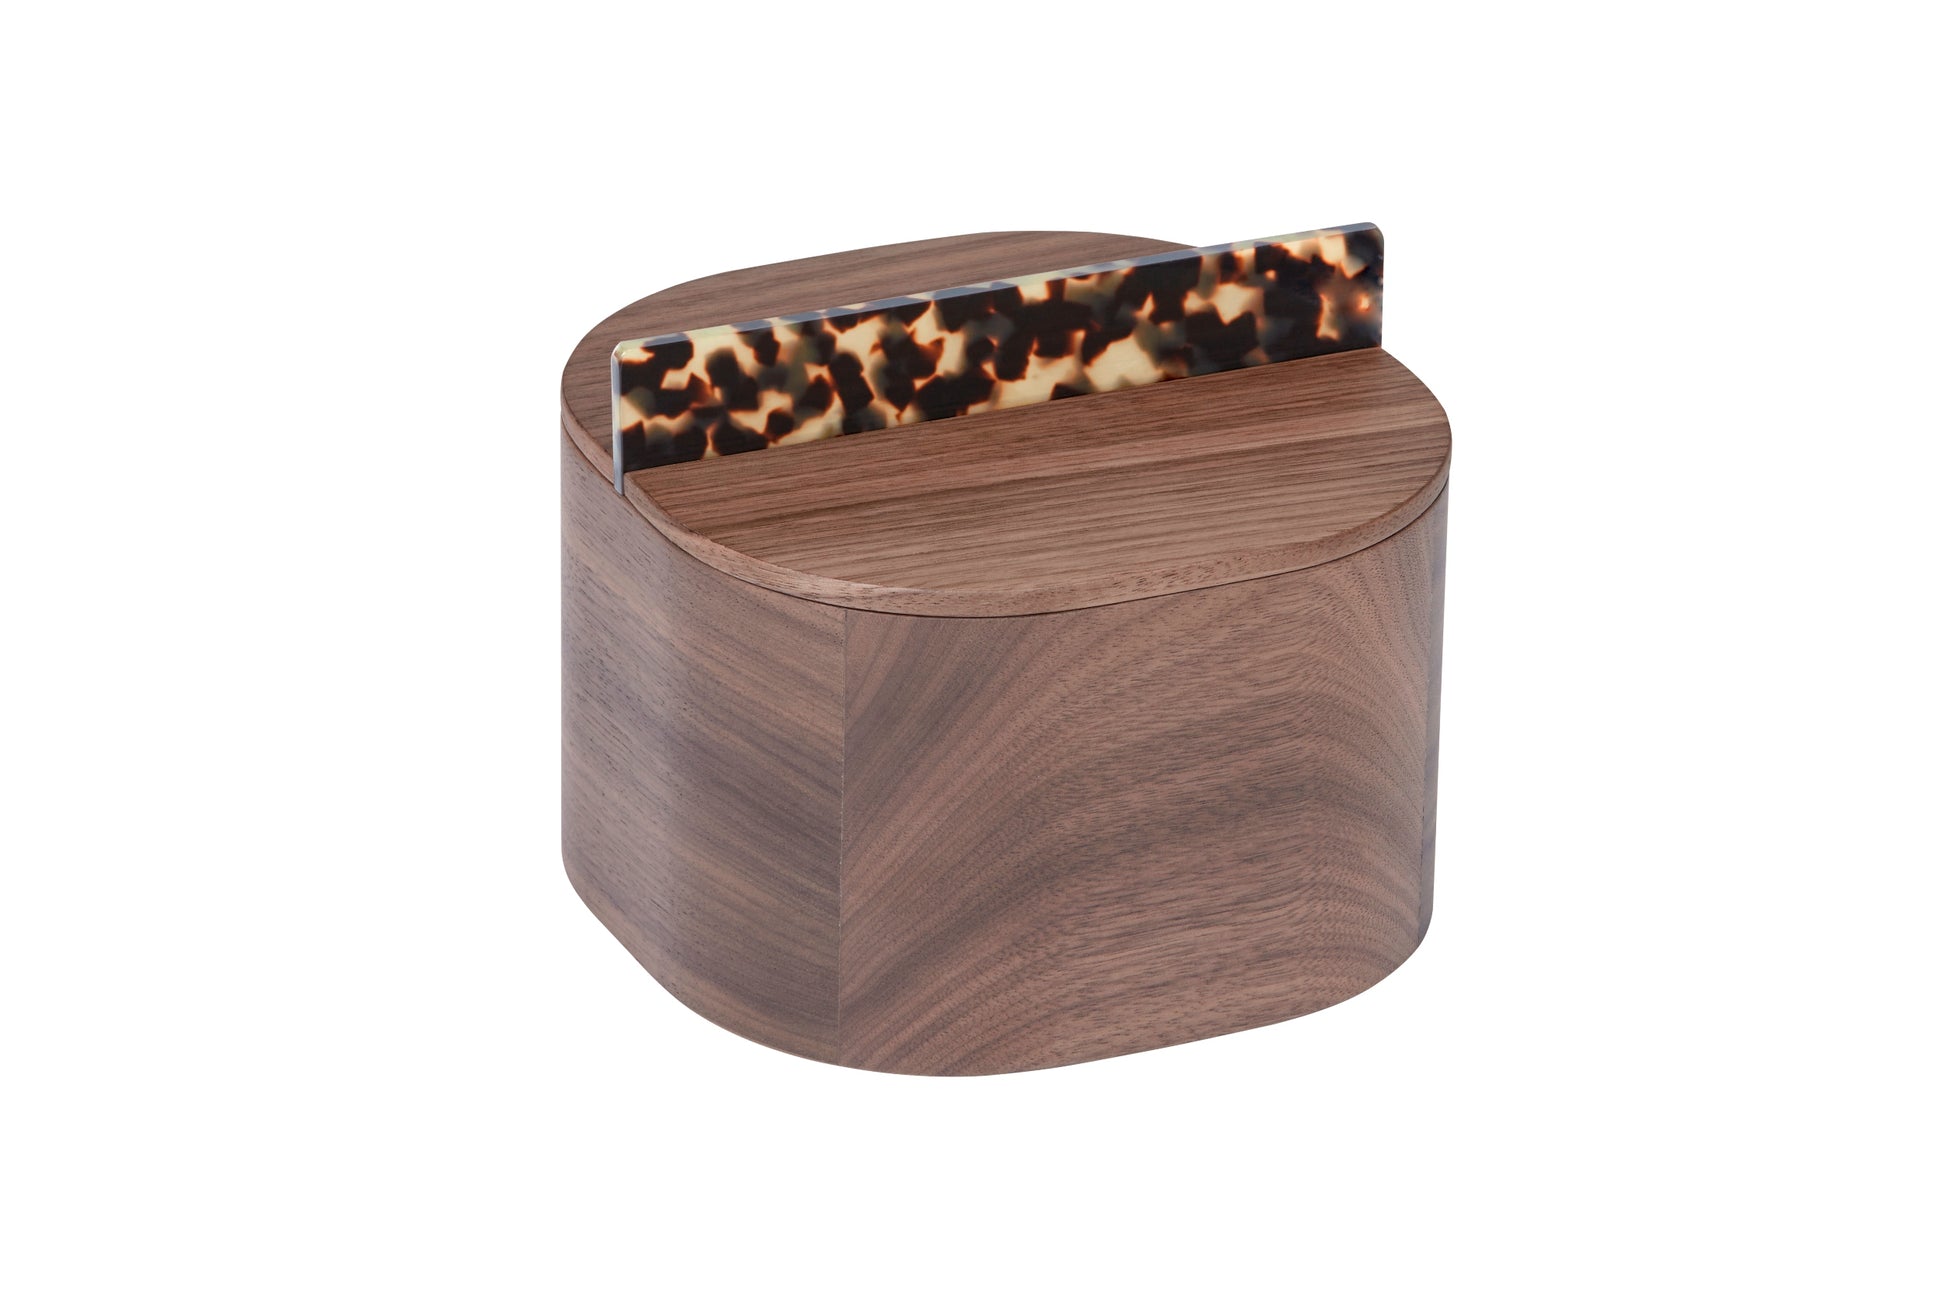 Riviere Dama Tortoise Square Rounded Box | Luxury Home Accessories, Elegant Decorative Boxes & Gift Items | 2Jour Concierge, #1 luxury high-end gift & lifestyle shop. Wood structure available in two finishes with tortoise shell acetate handles.